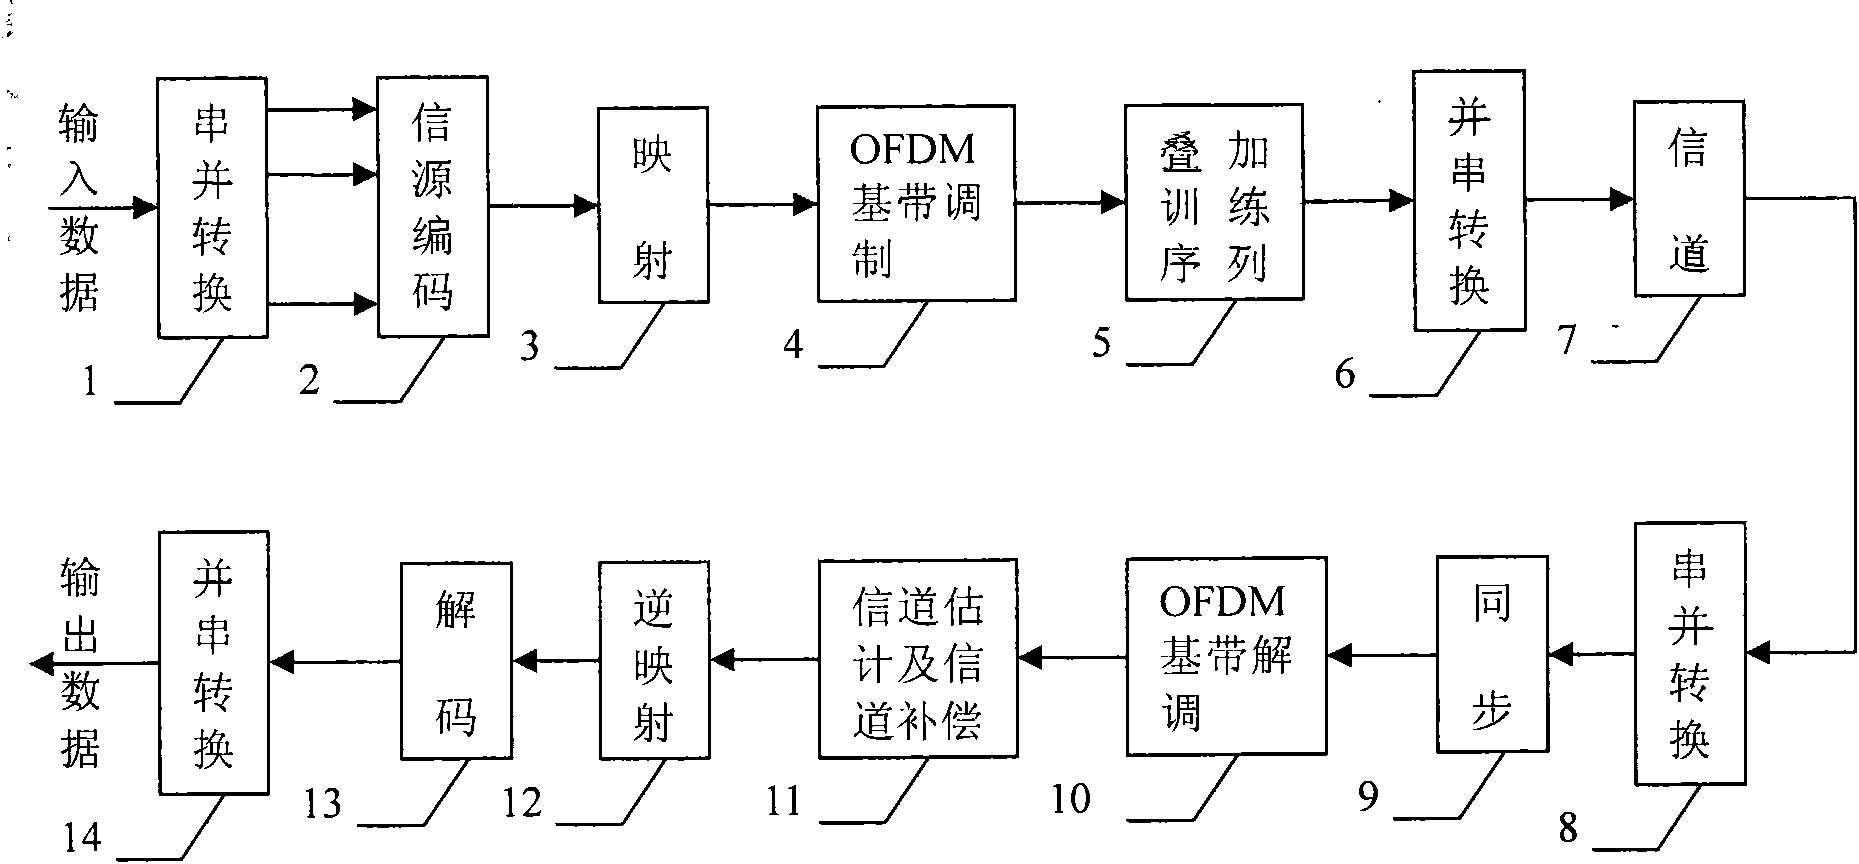 Training sequence structure and synchronization algorithm suitable for OFDM time synchronization